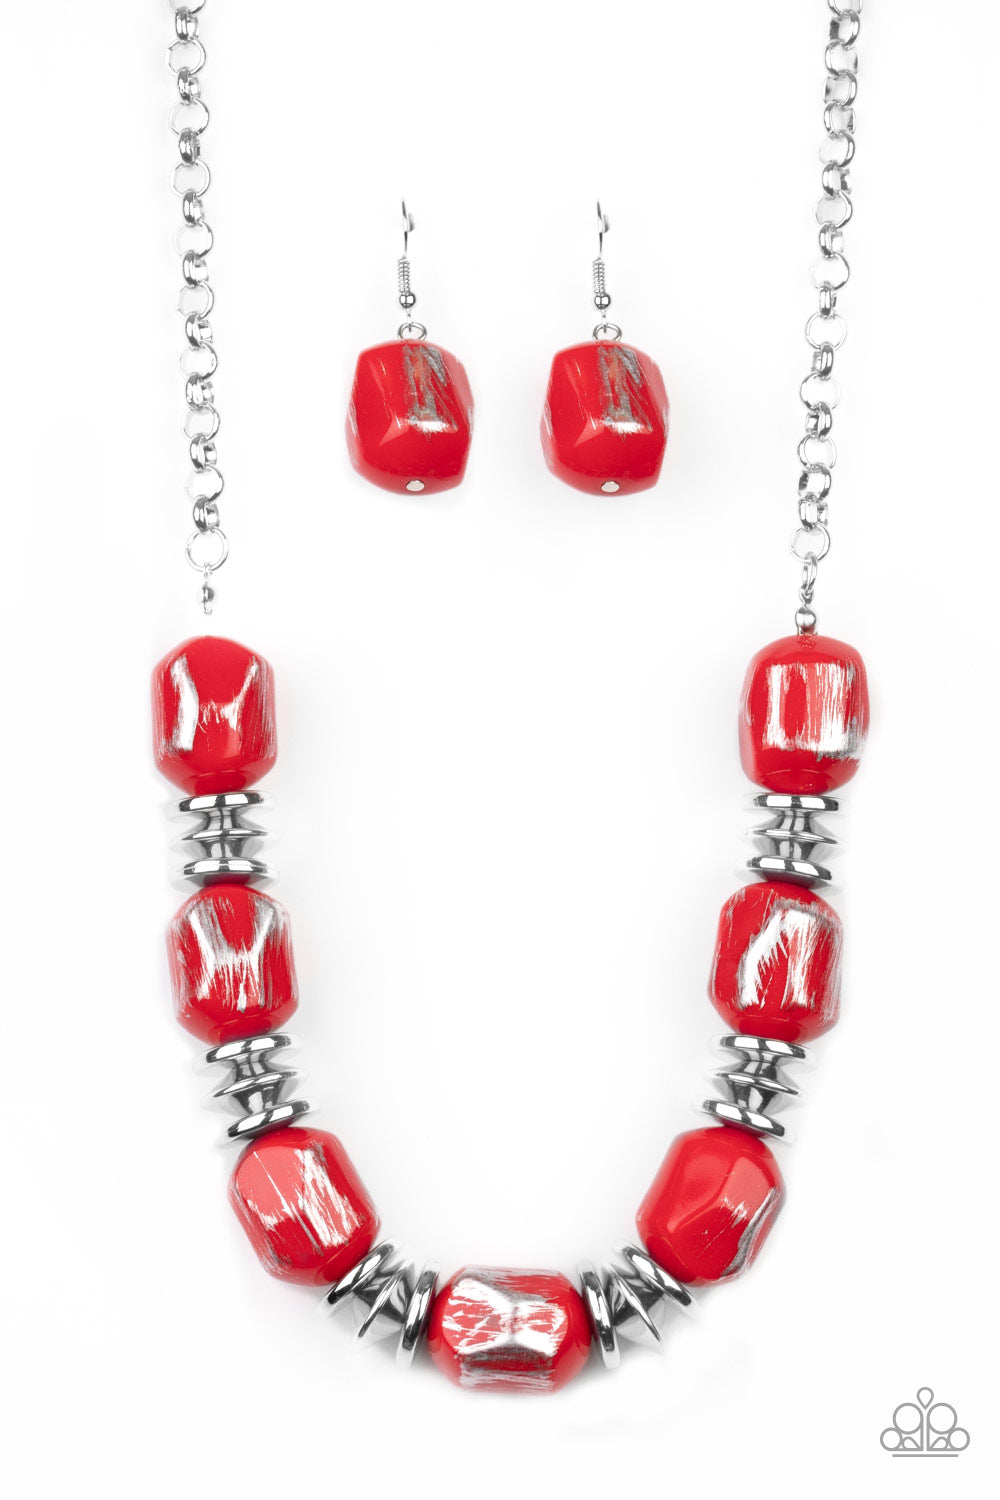 Paparazzi Girl Grit - Red Necklace - A Finishing Touch 